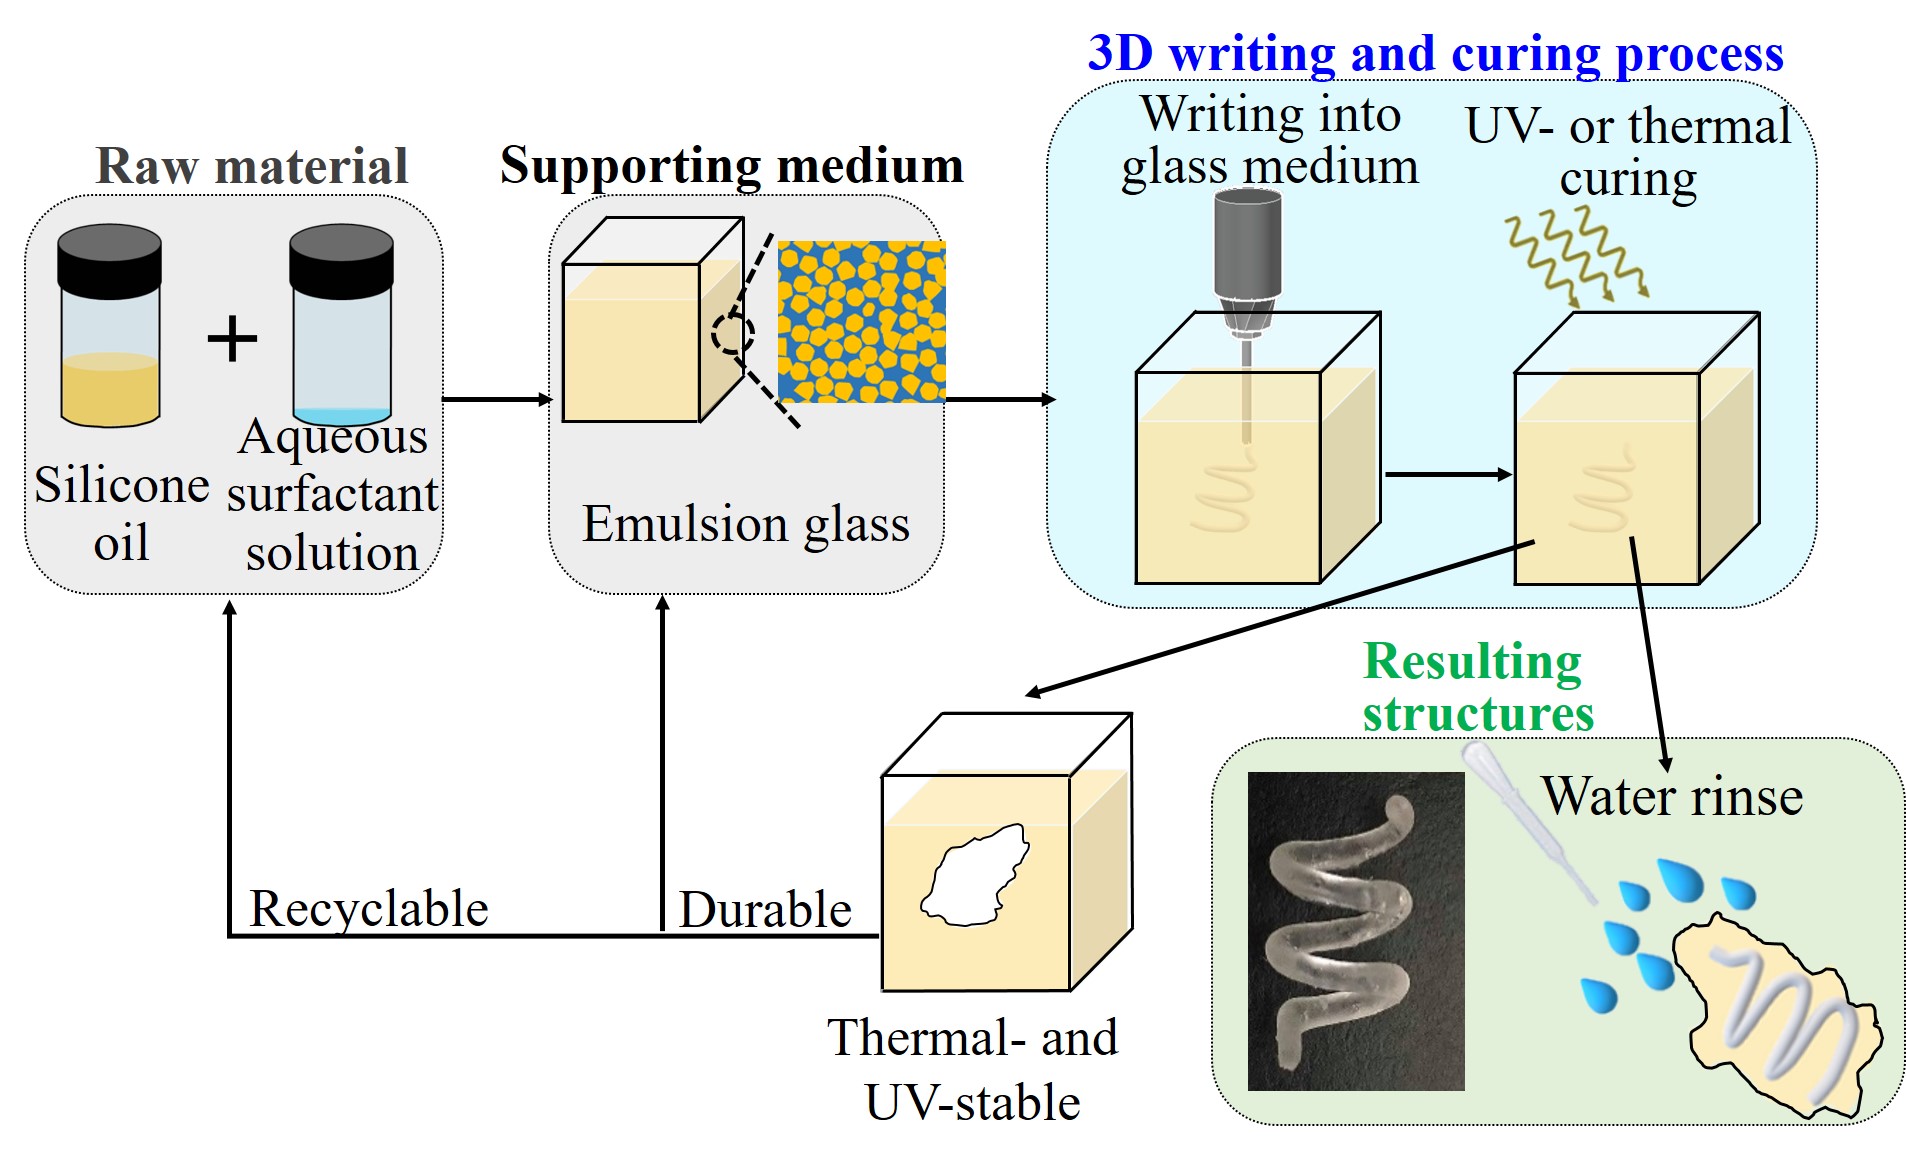 UV-resistant Self-healing Emulsion Glass as a New Liquid-like Solid Material for 3D Printing